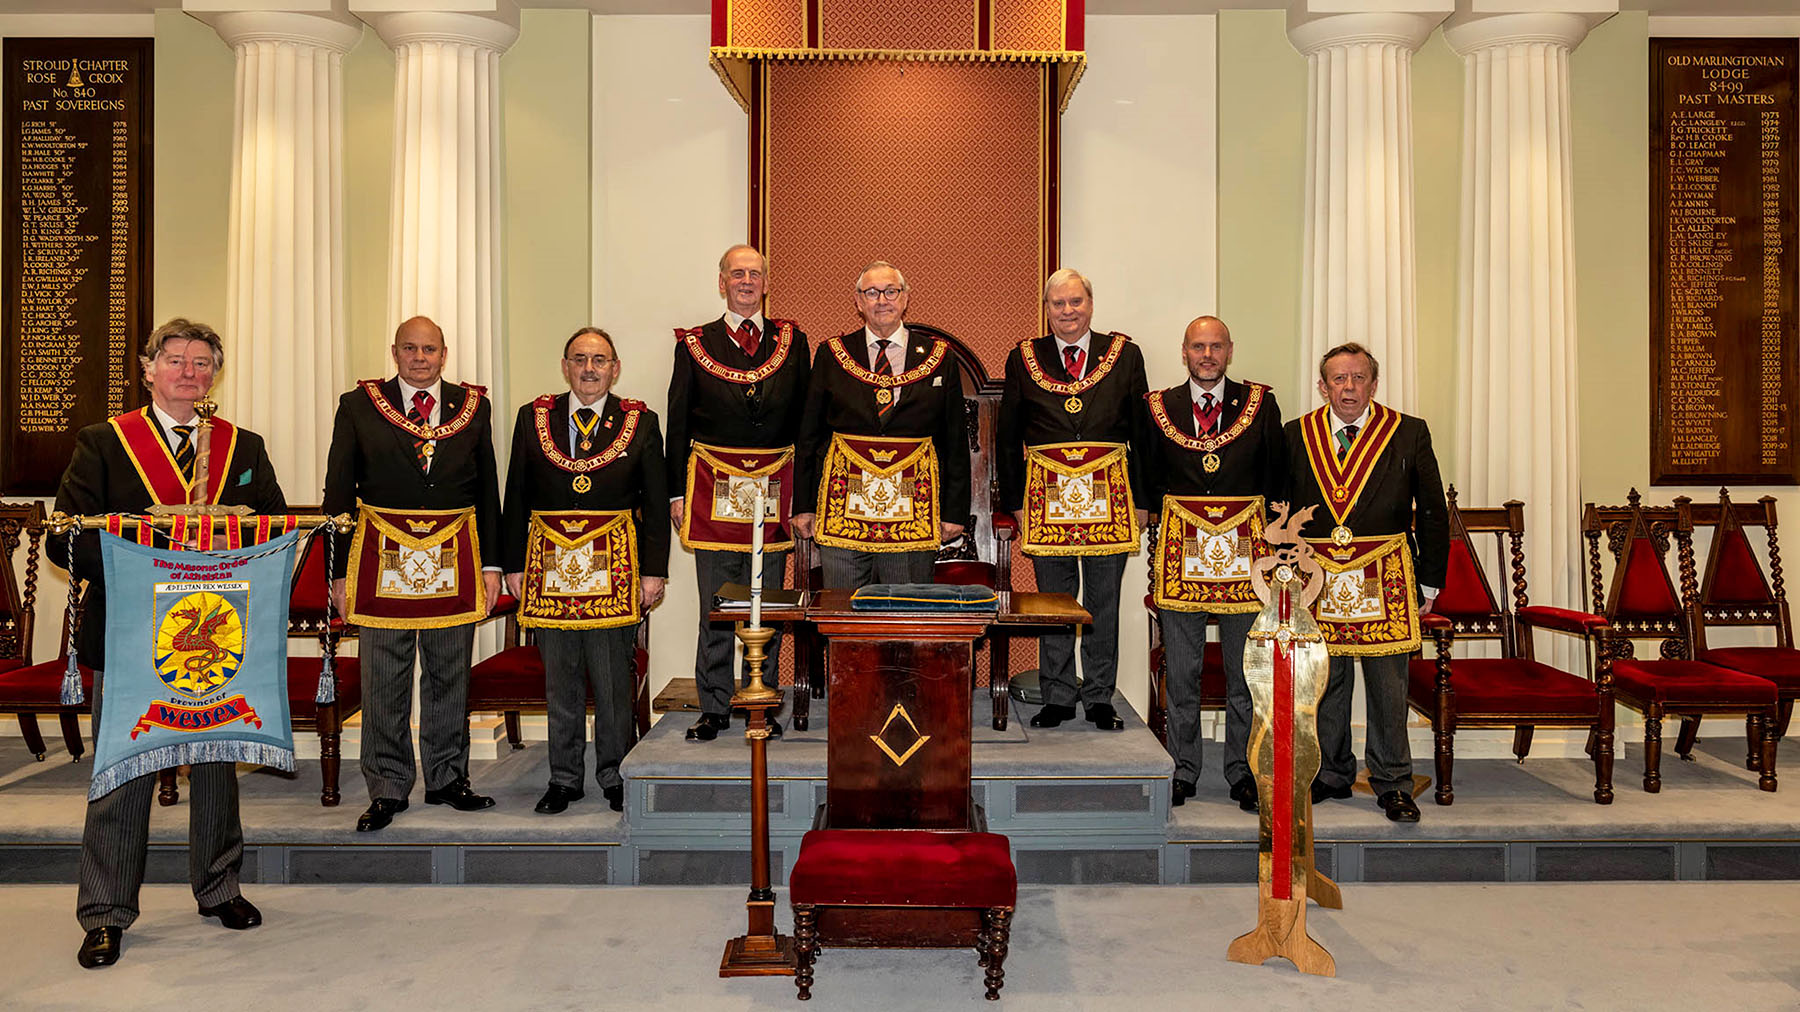 The Annual Meeting of the Province of Wessex